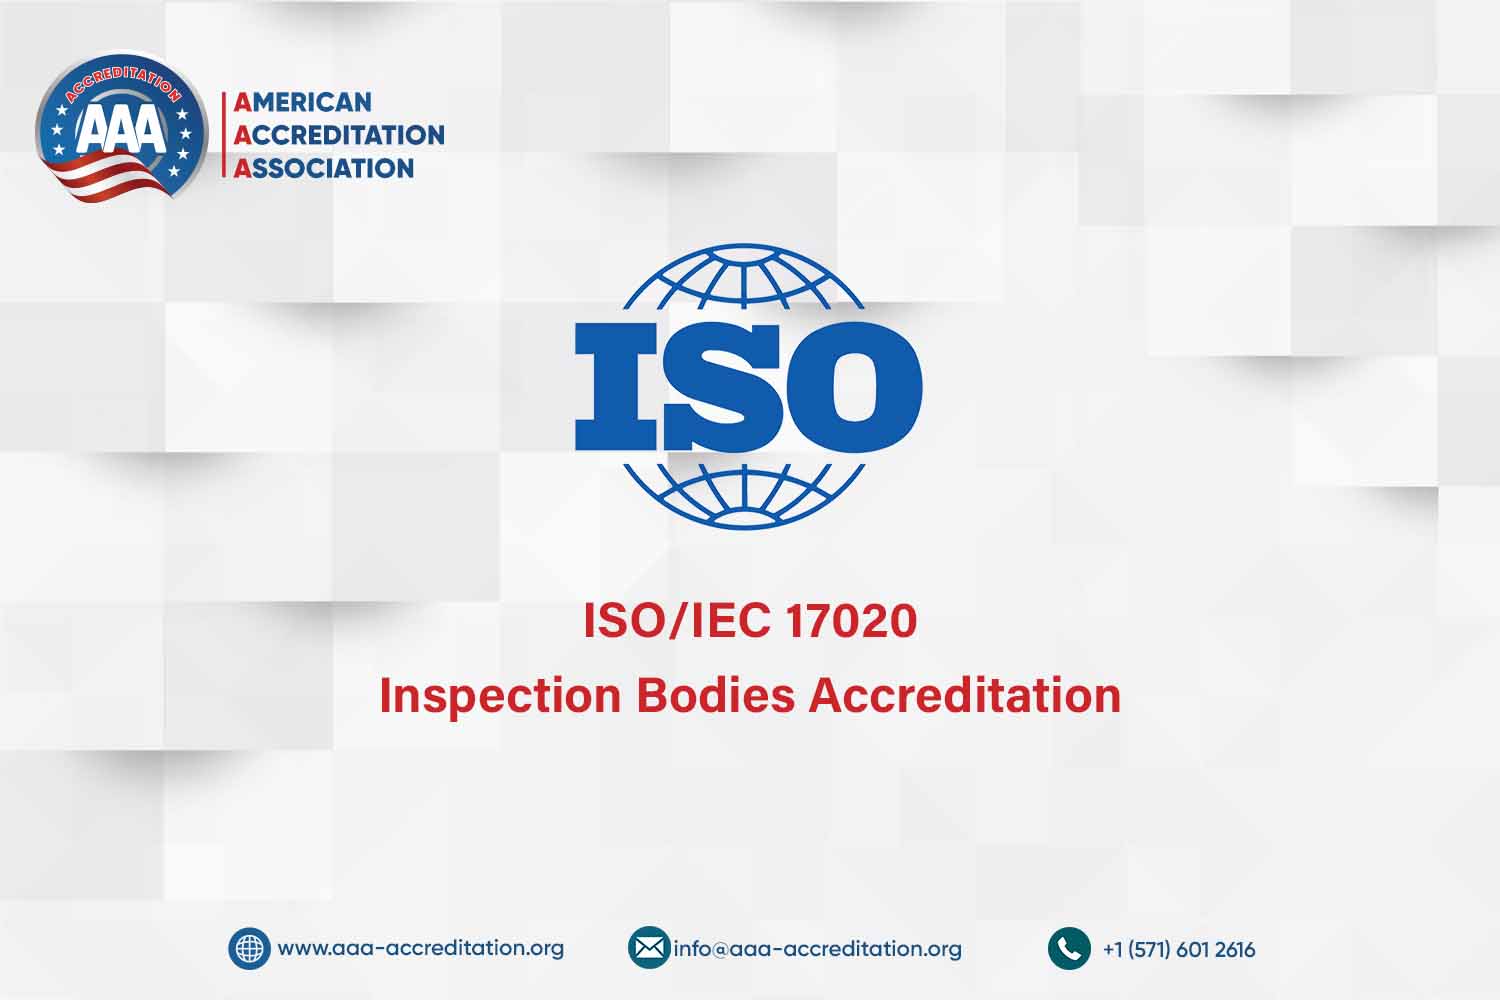 Upcoming ISO/IEC 17020 Online Training for Inspection Bodies Accreditation